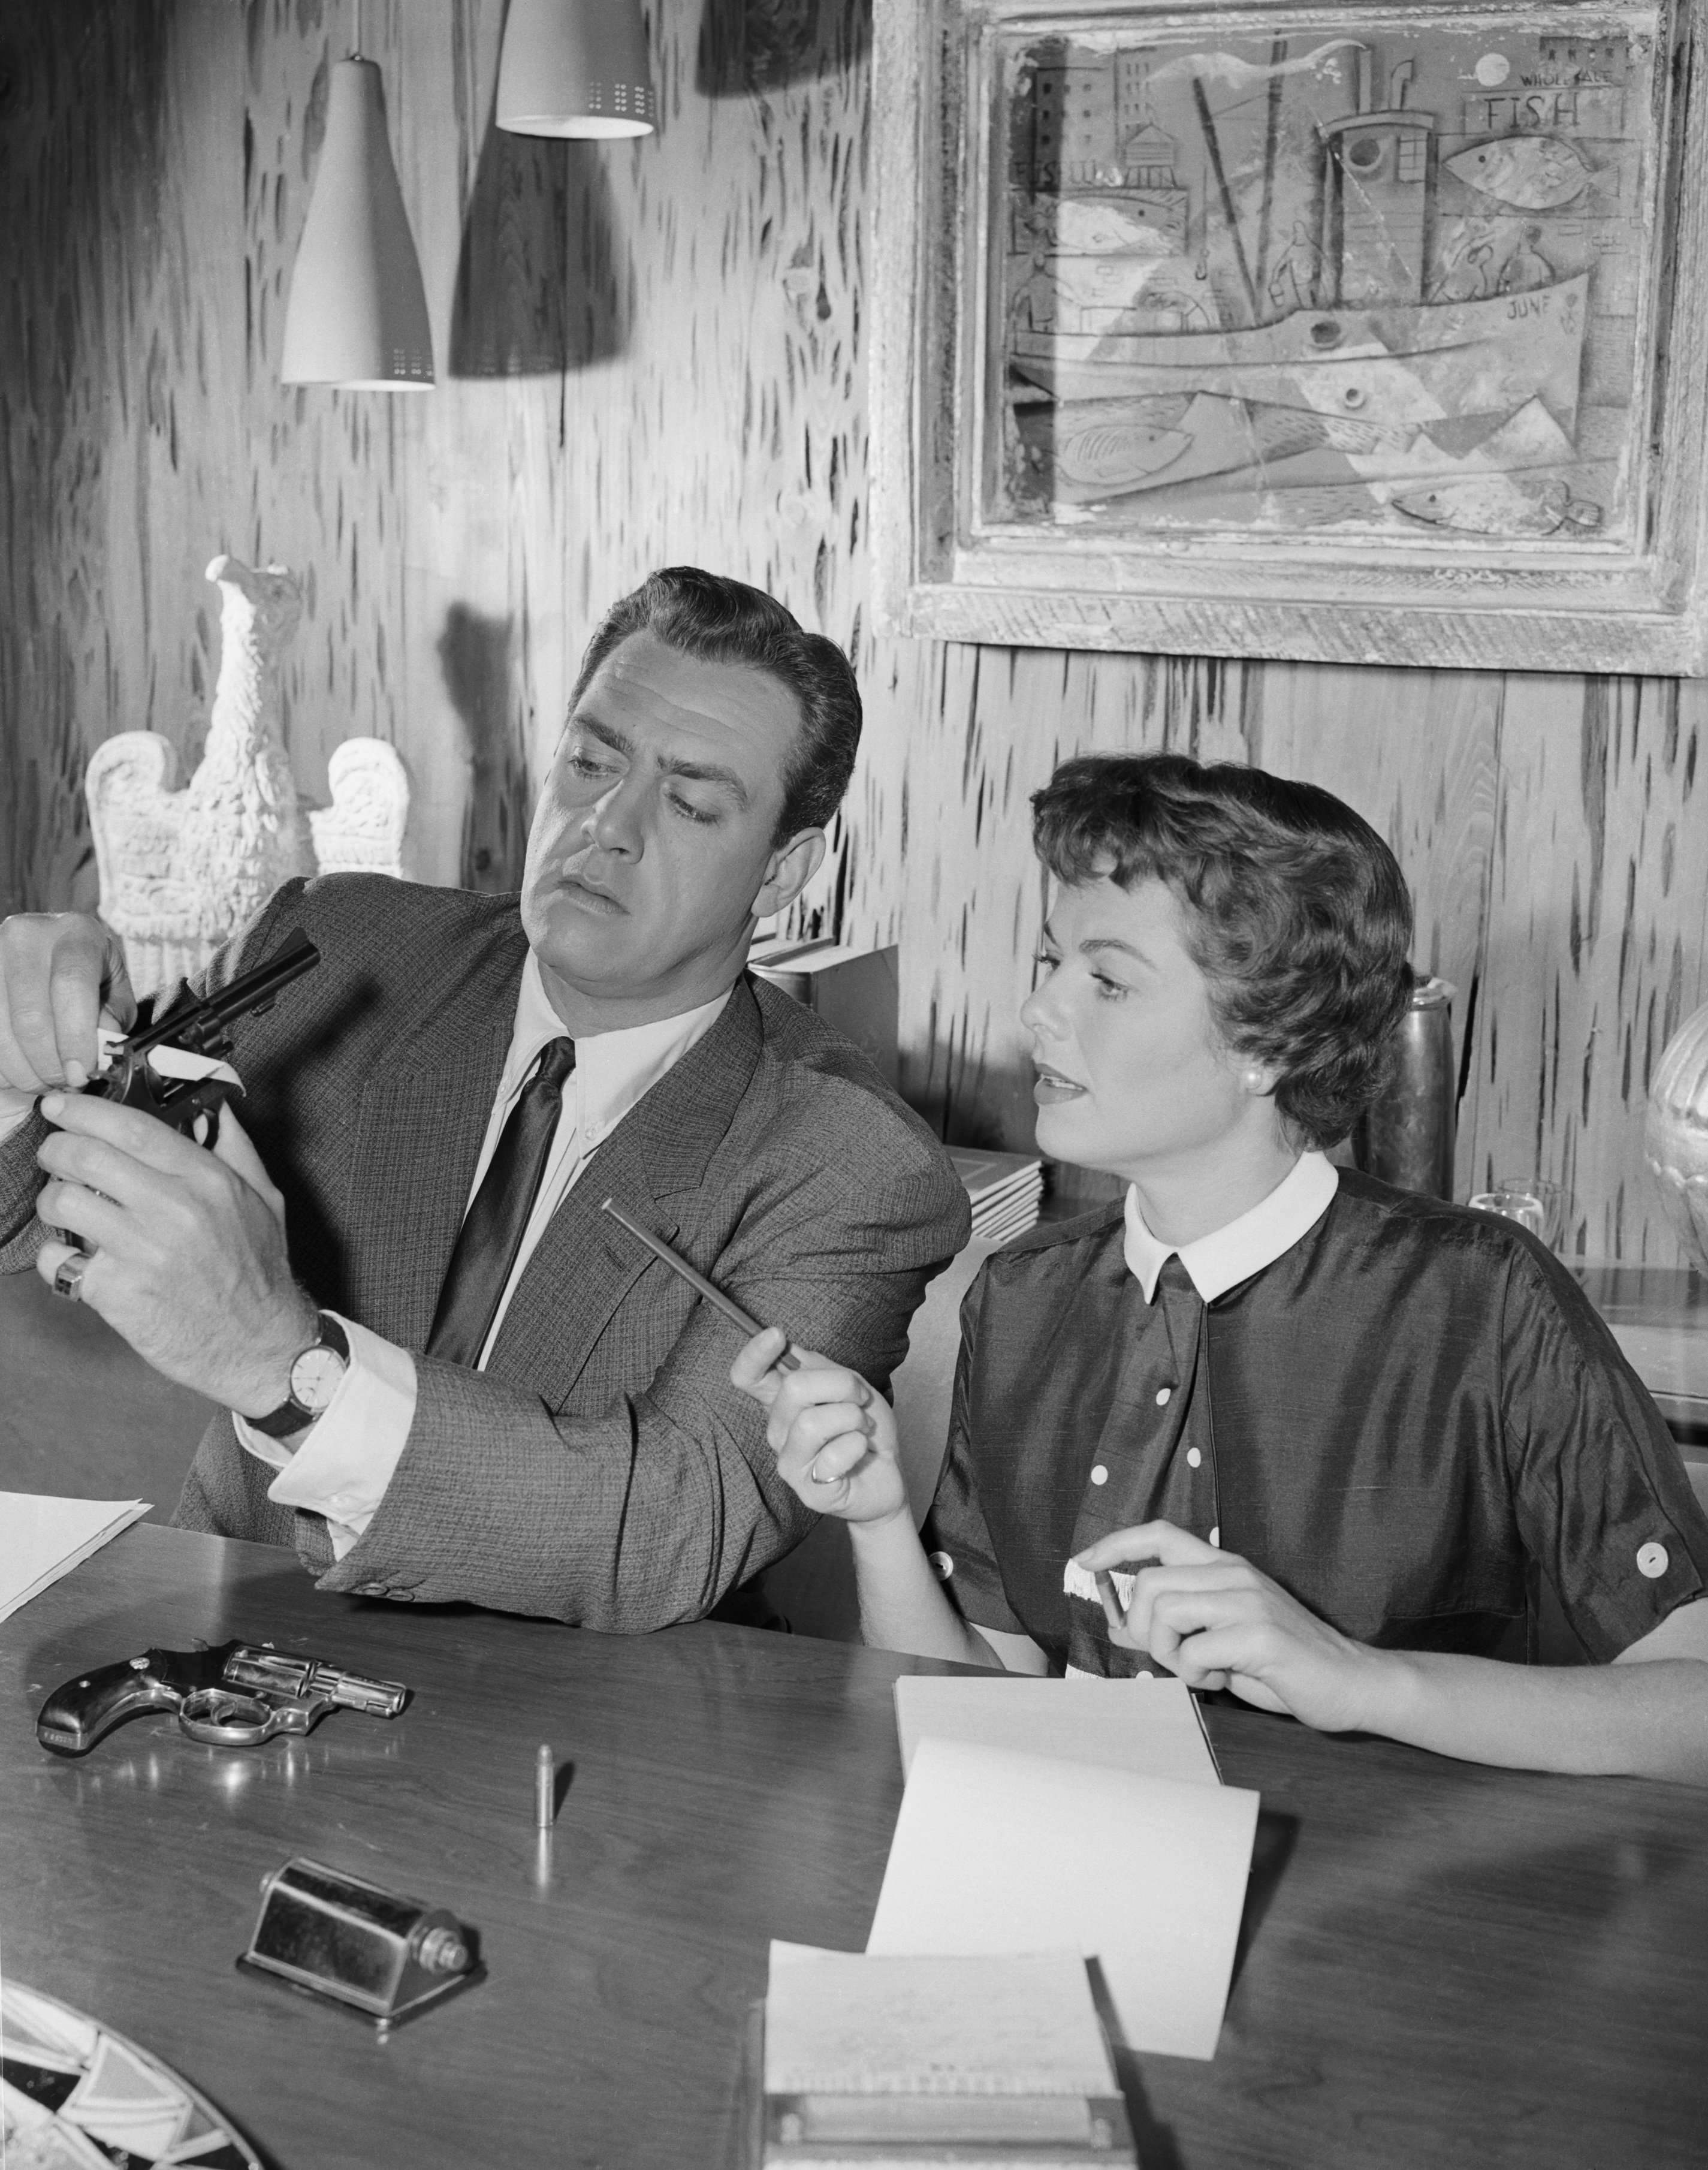 Raymond Burr and Barbara Hale as Perry Mason and Della Street from the television show Perry Mason. | Source: Getty Images